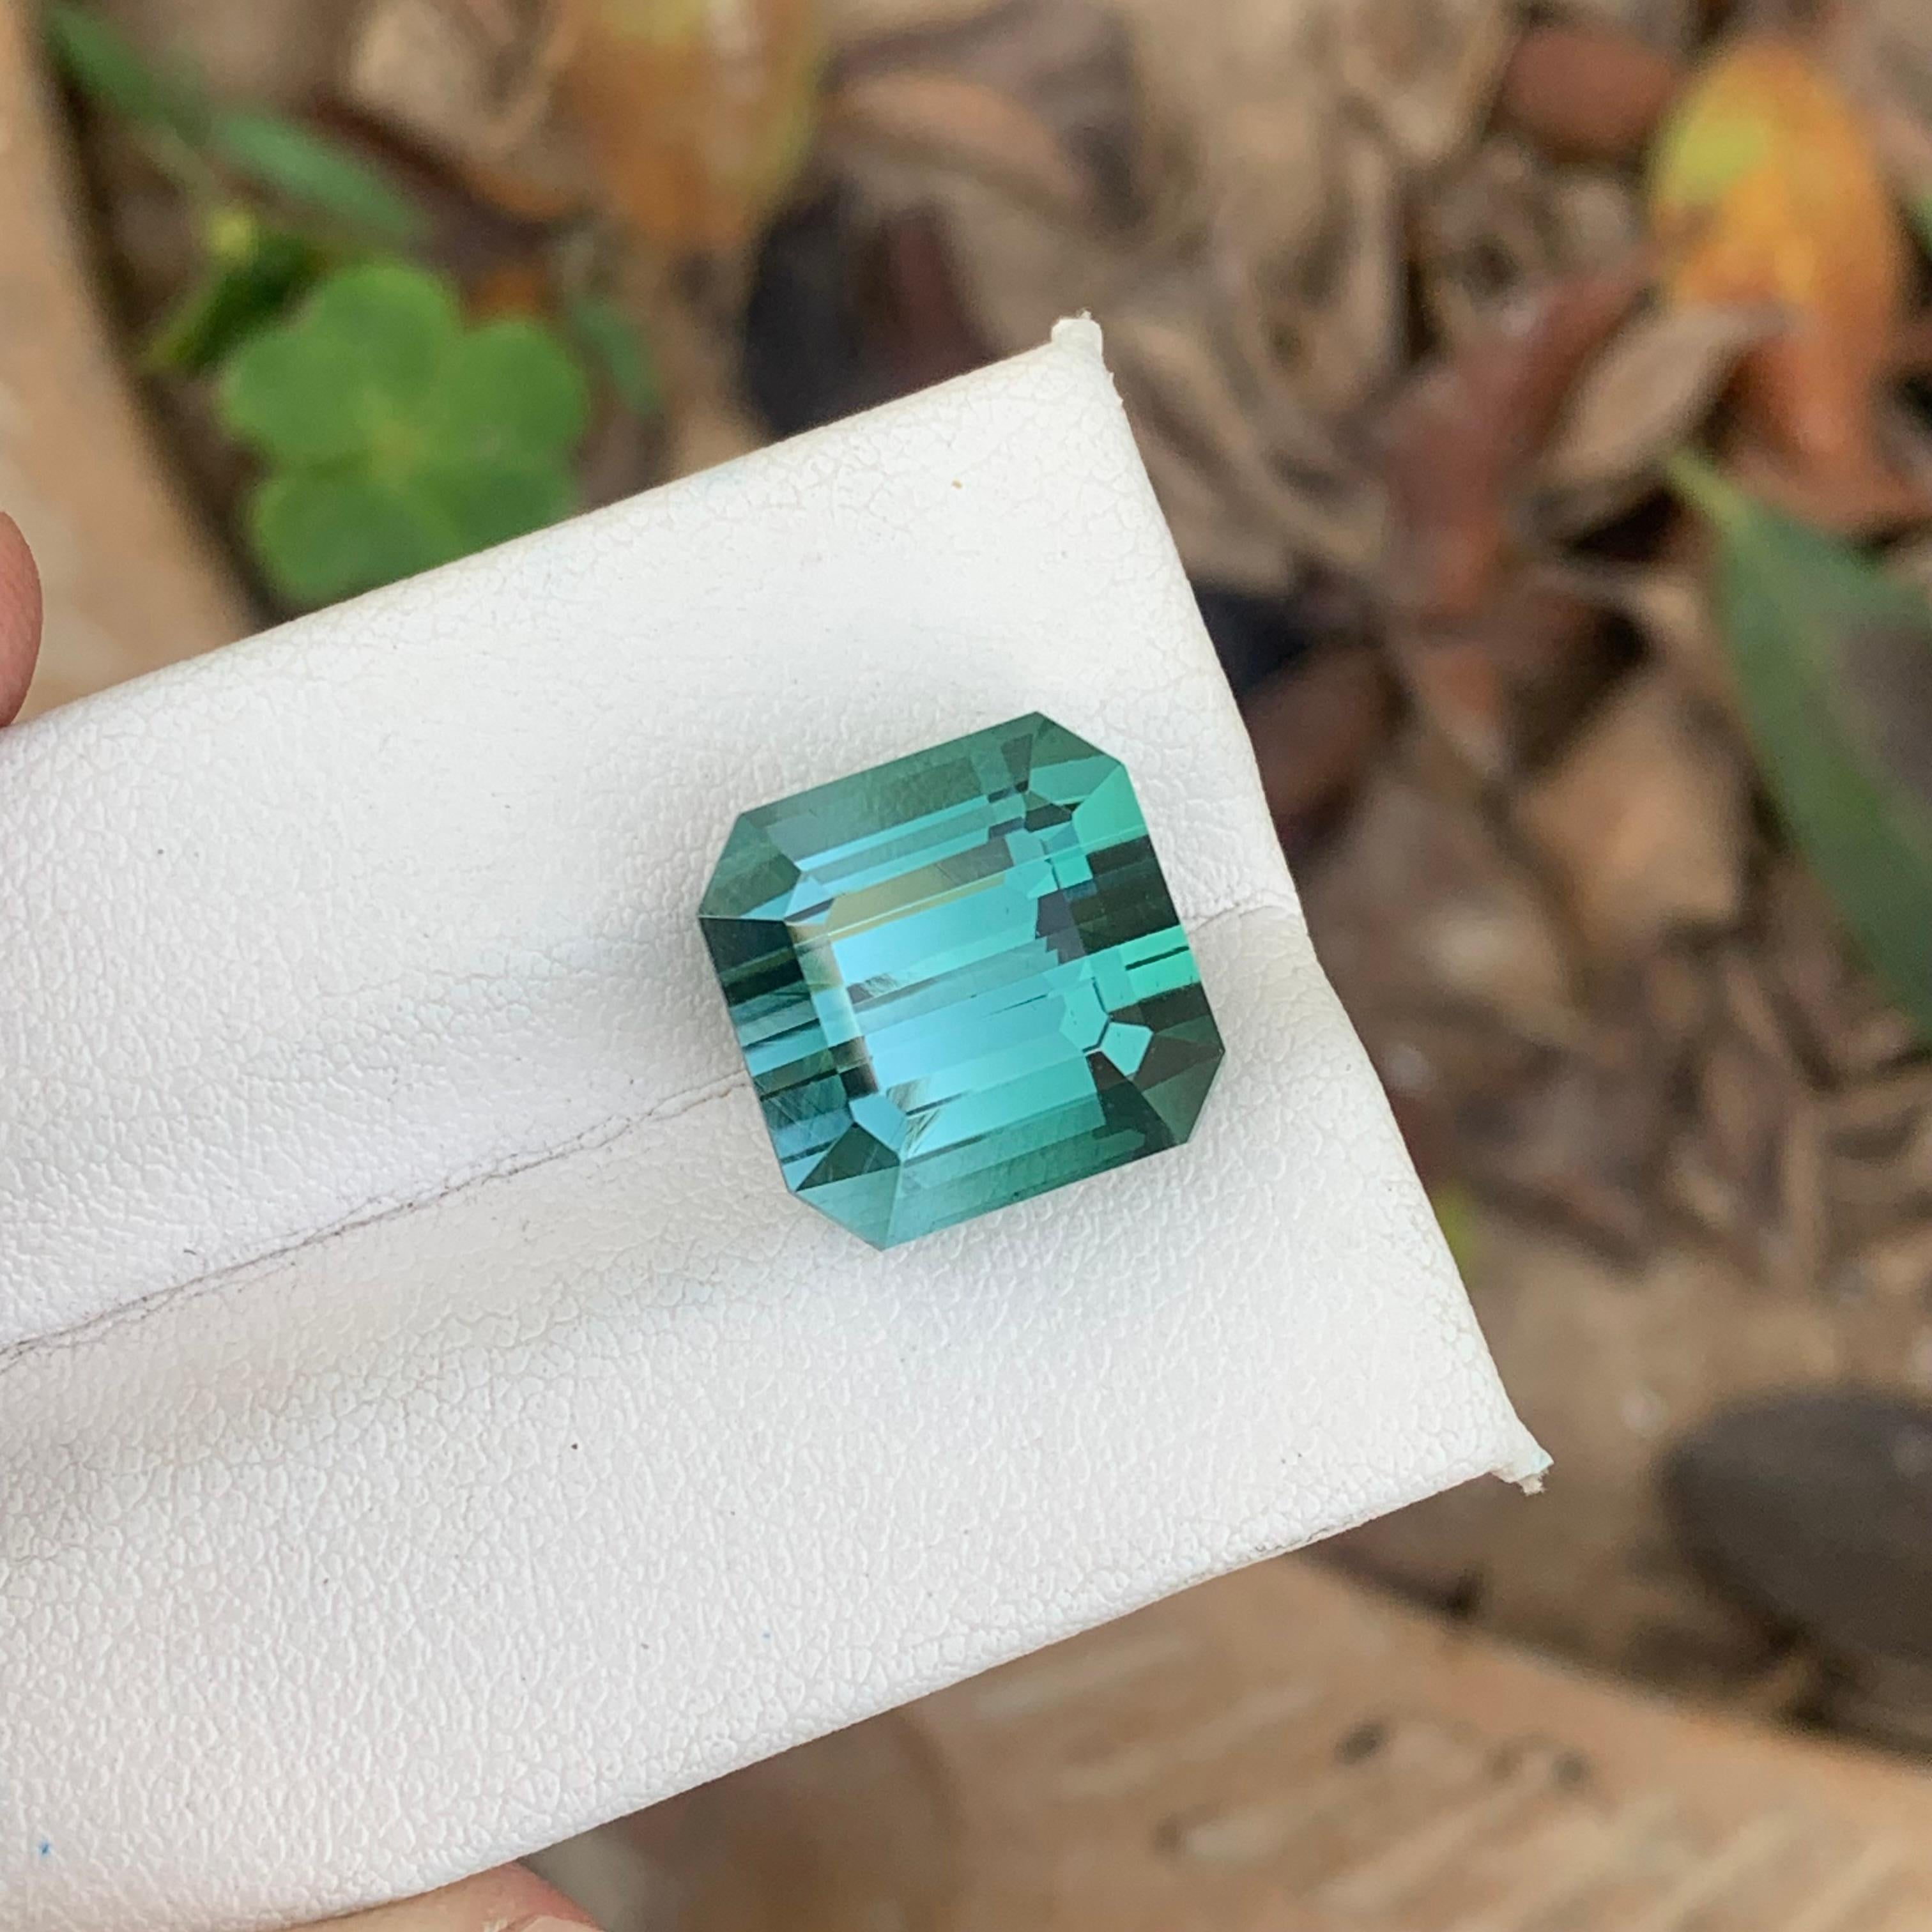 Gemstone Type : Tourmaline
Weight : 12.80 Carats
Dimensions : 12.3x12.3x10 Mm
Origin : Kunar Afghanistan
Clarity : Eye Clean
Shape: Emerald 
Color: Neon Blue
Certificate: On Demand
Basically, mint tourmalines are tourmalines with pastel hues of